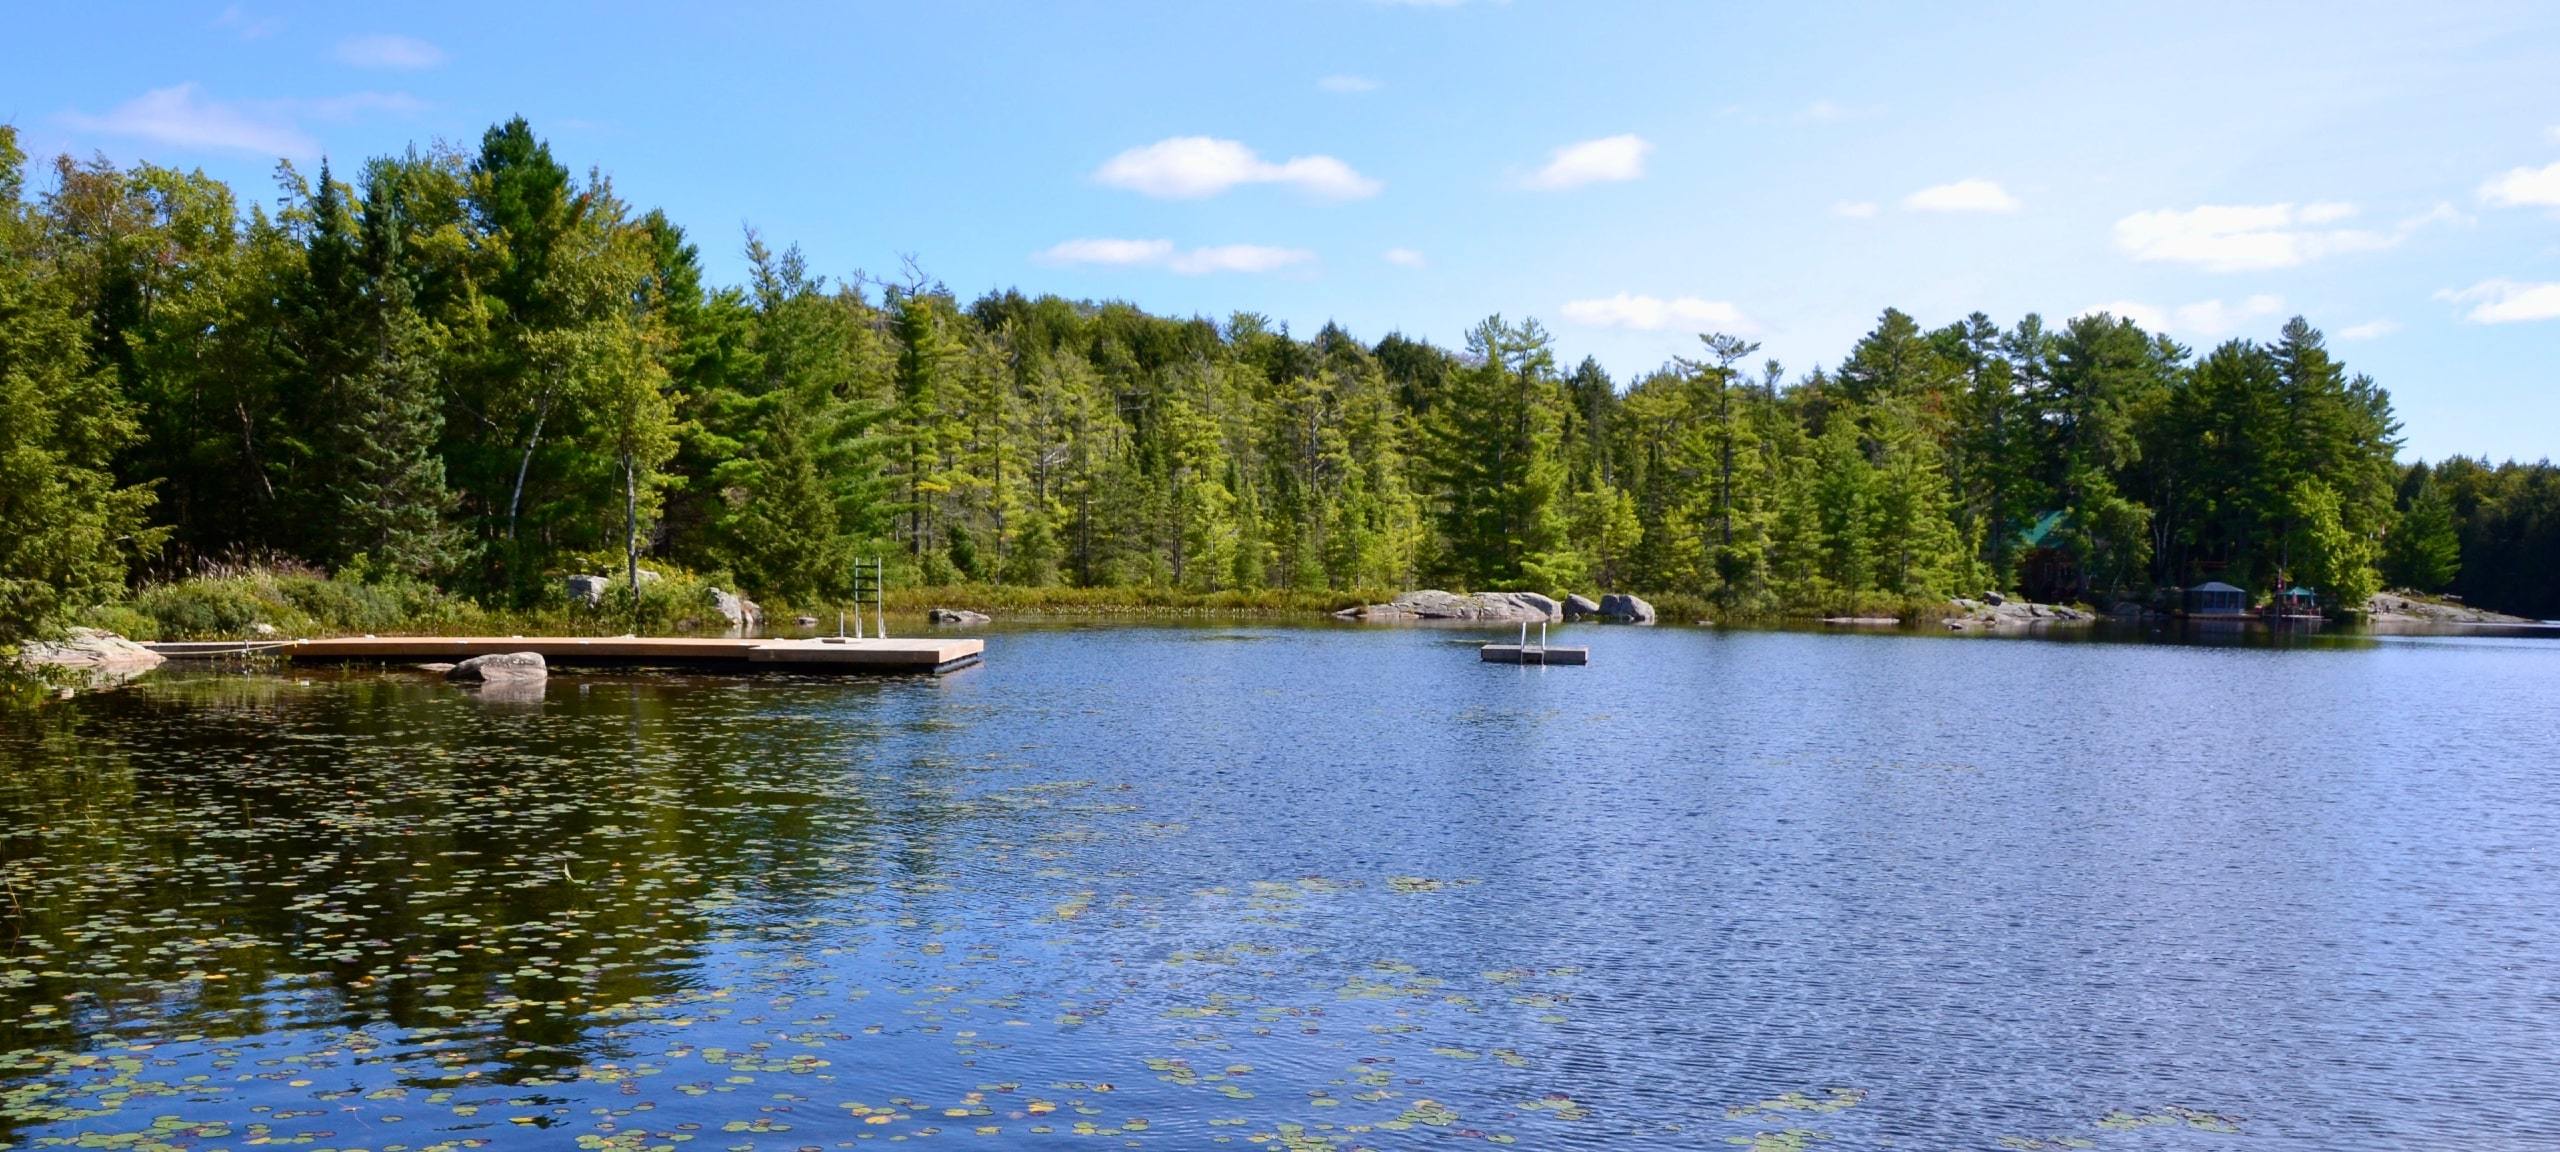 Docks and forested lake during a Muskoka Lakes region summer